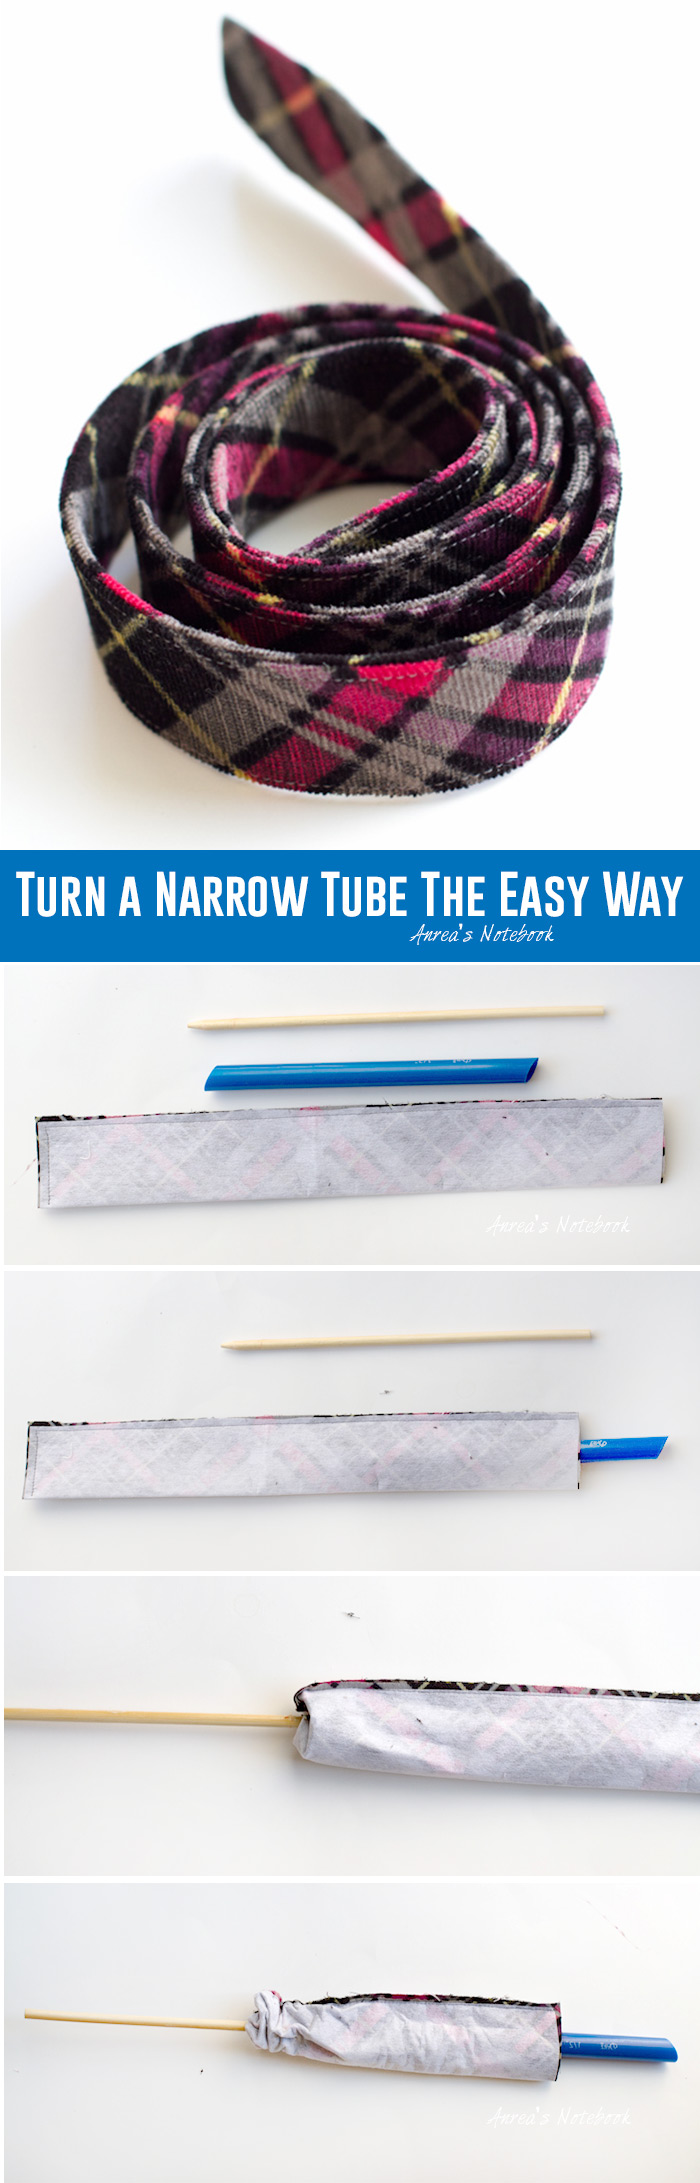 How to turn a narrow tube the easy way. i.e. Why had I never done this before???